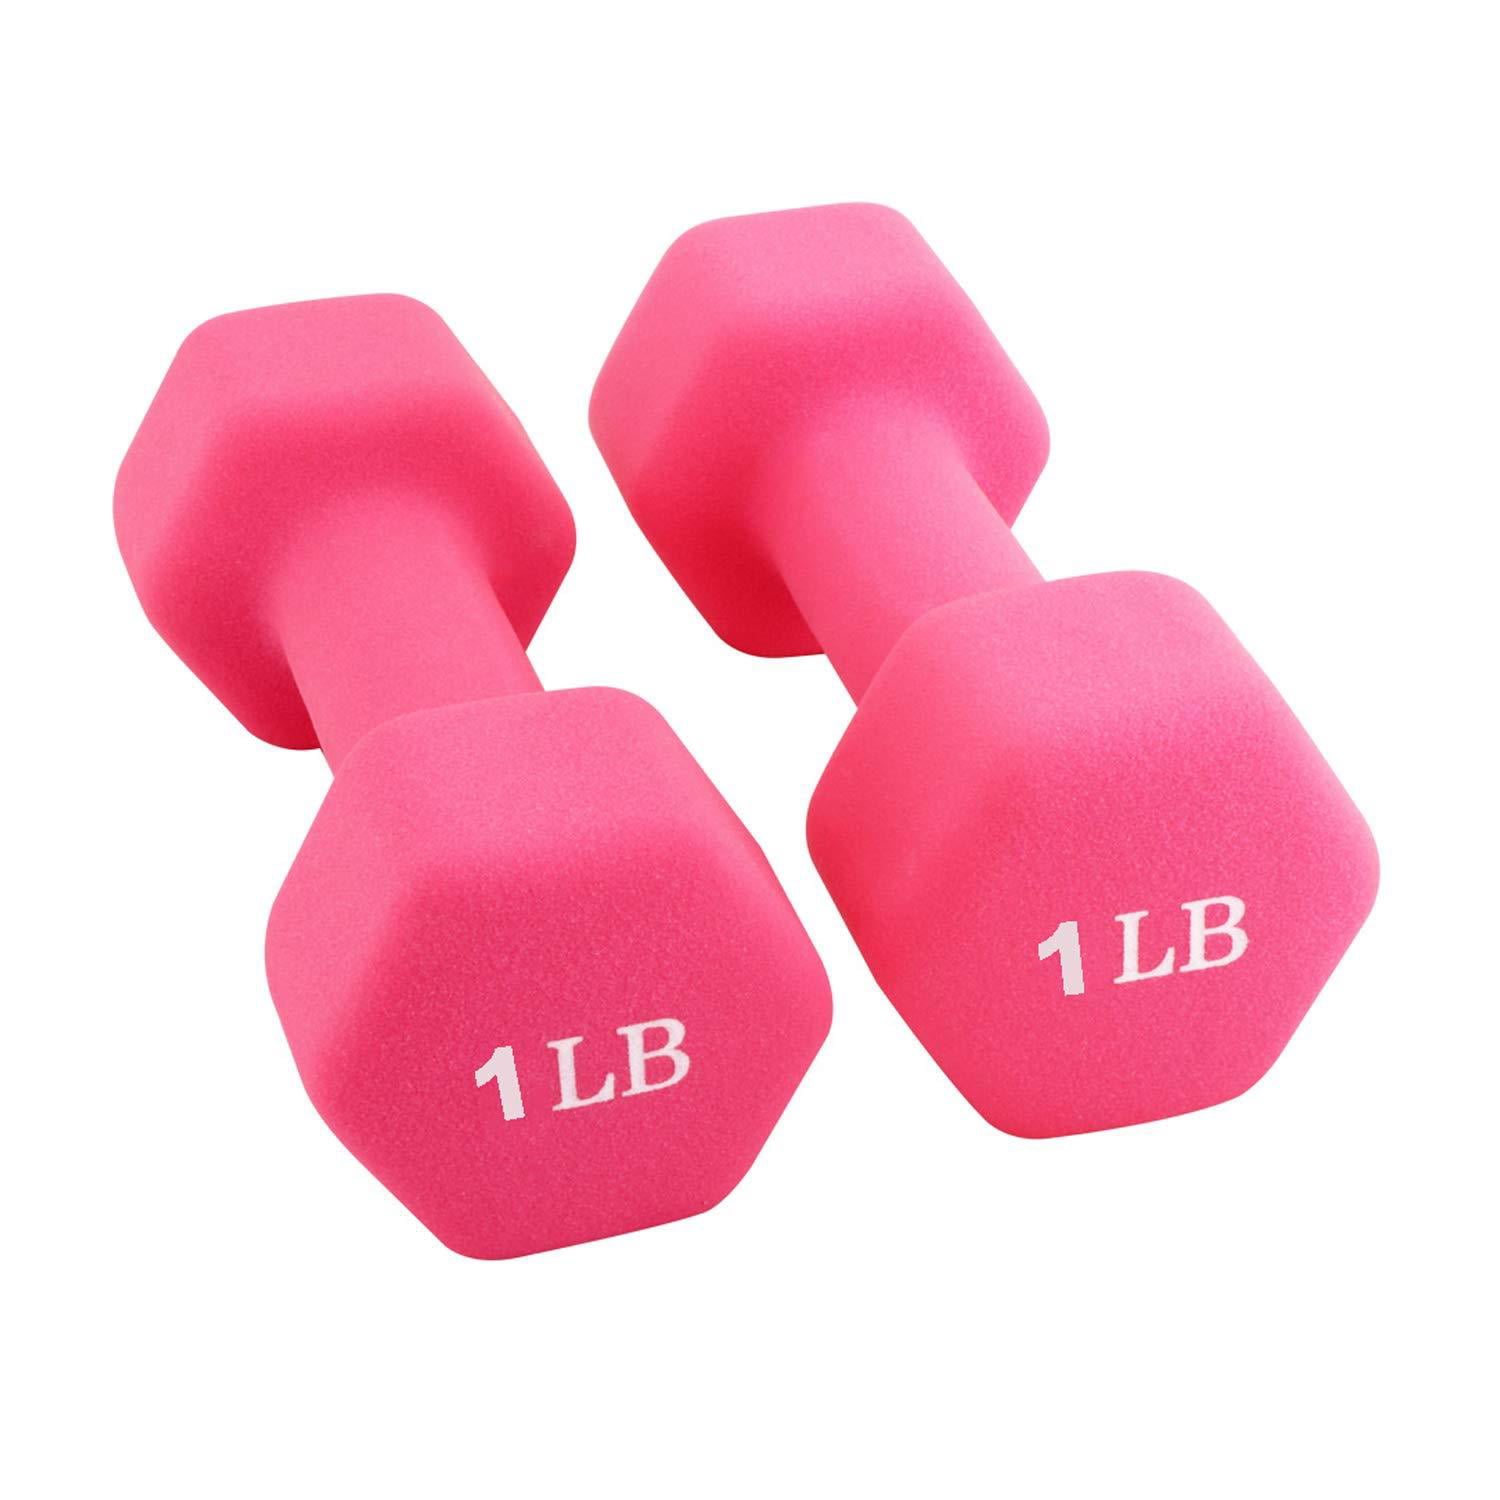 Portzon Set of 2 Neoprene Dumbbell Hand Weights Anti-roll Hex Shape Colorful Anti-Slip 